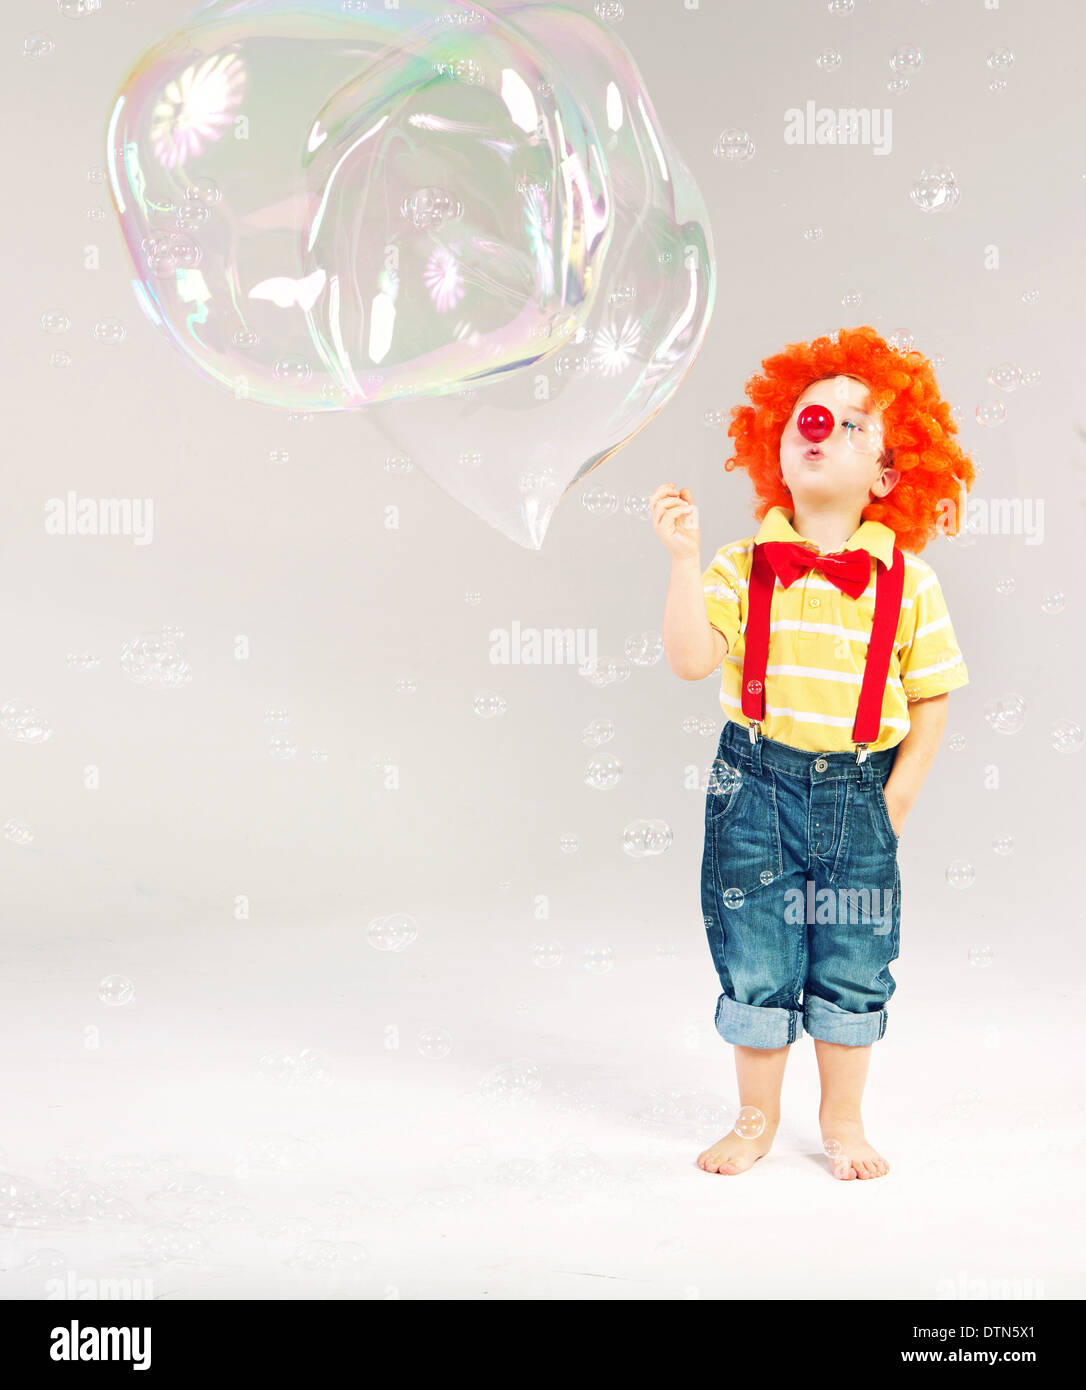 Funny picture of little clown making huge soap bubbles Stock Photo